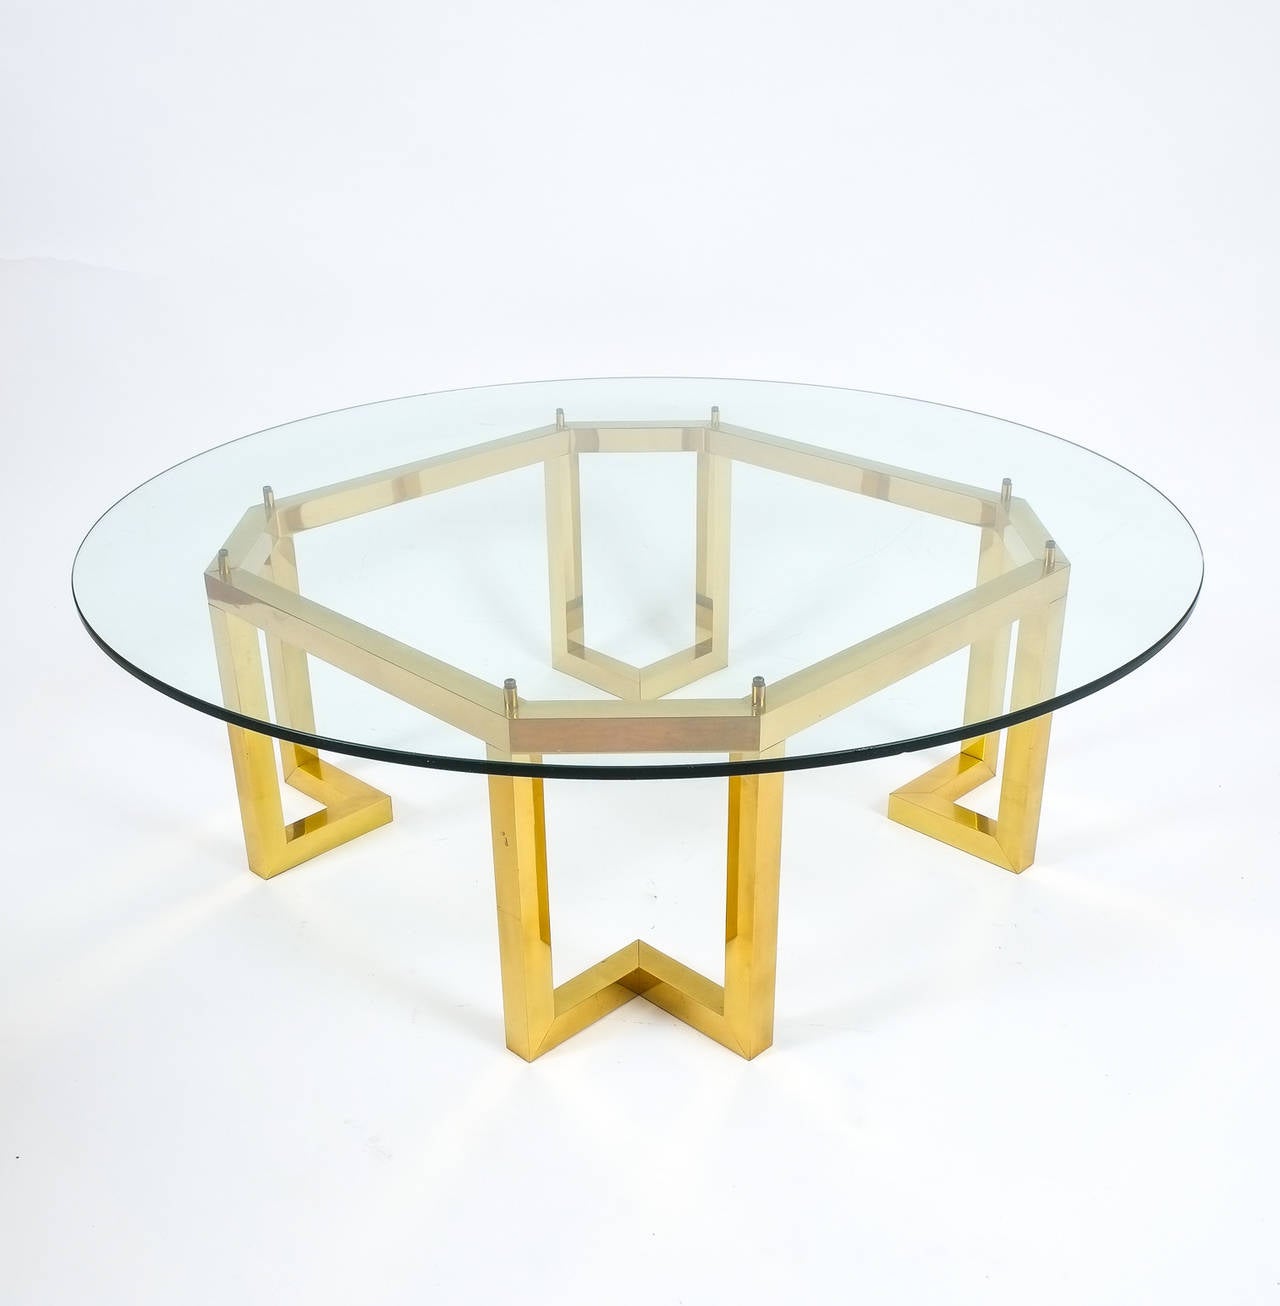 Excellent pair of early 1980 large brass tables featuring an octagonal brass base and a hovering glass tabletop. The tabletop as pictured measures 47.24 inches in diameter and is an optional feature.